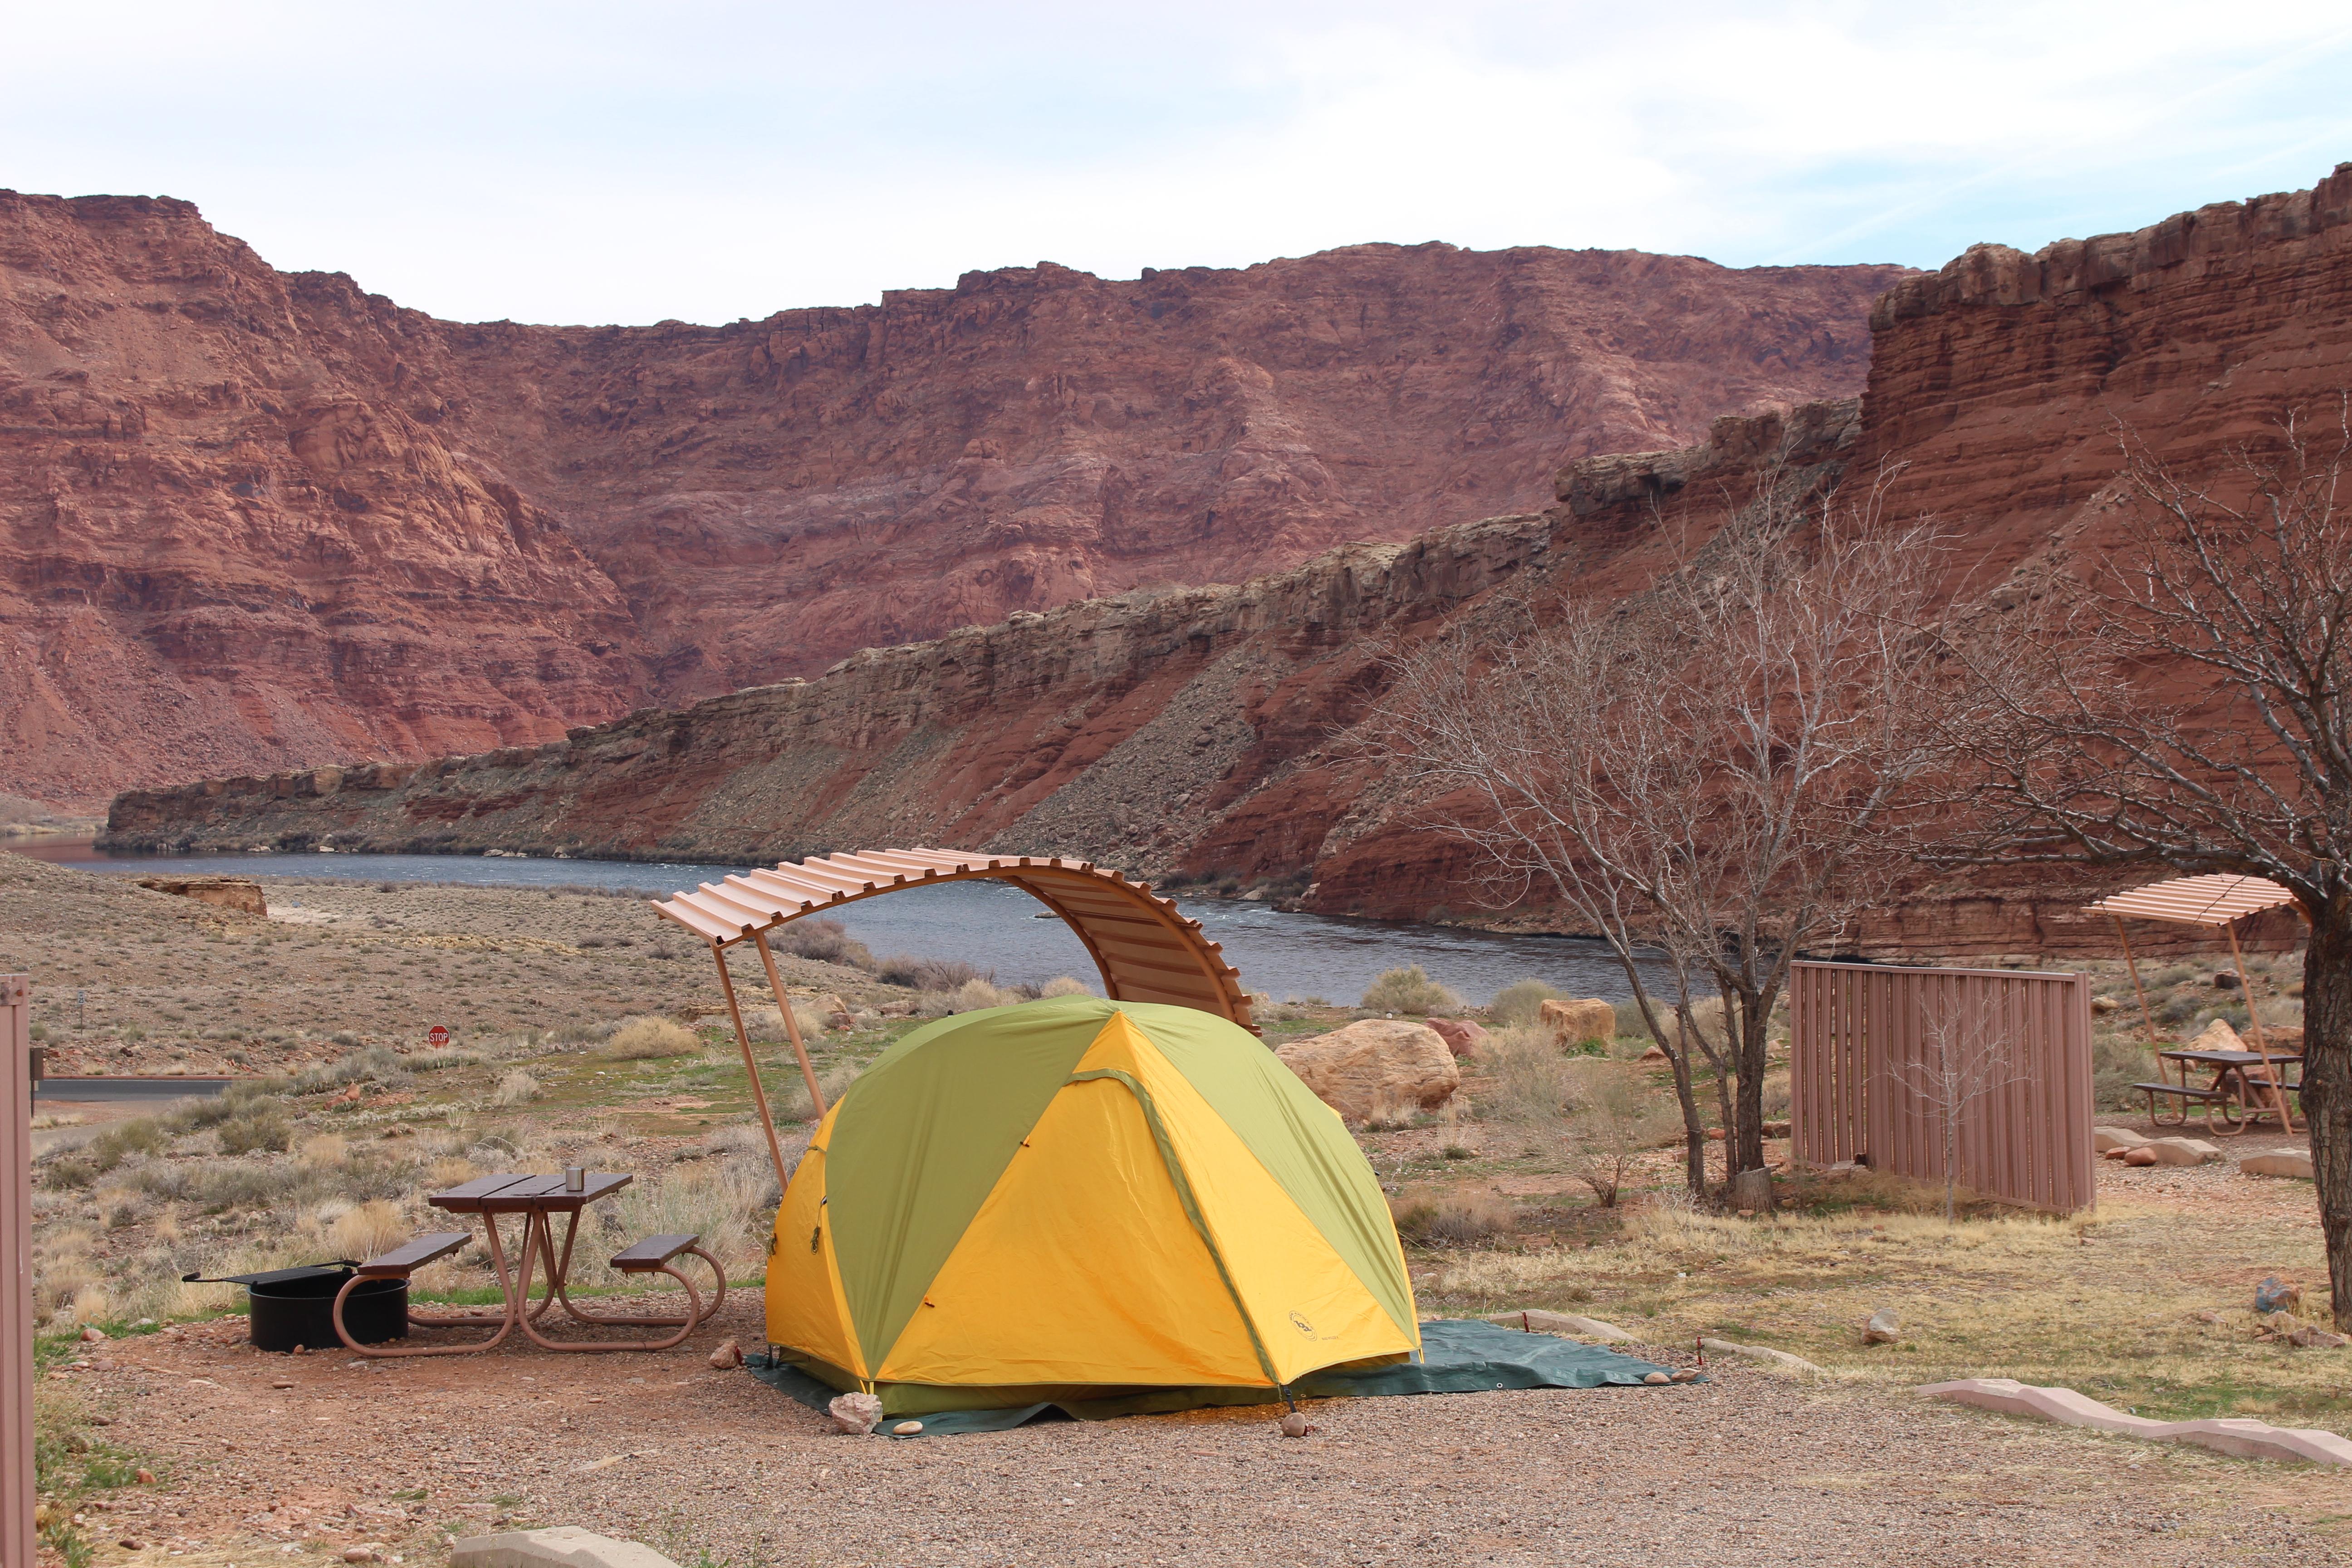 Dome tent and campsite overlooking river and sandstone cliffs